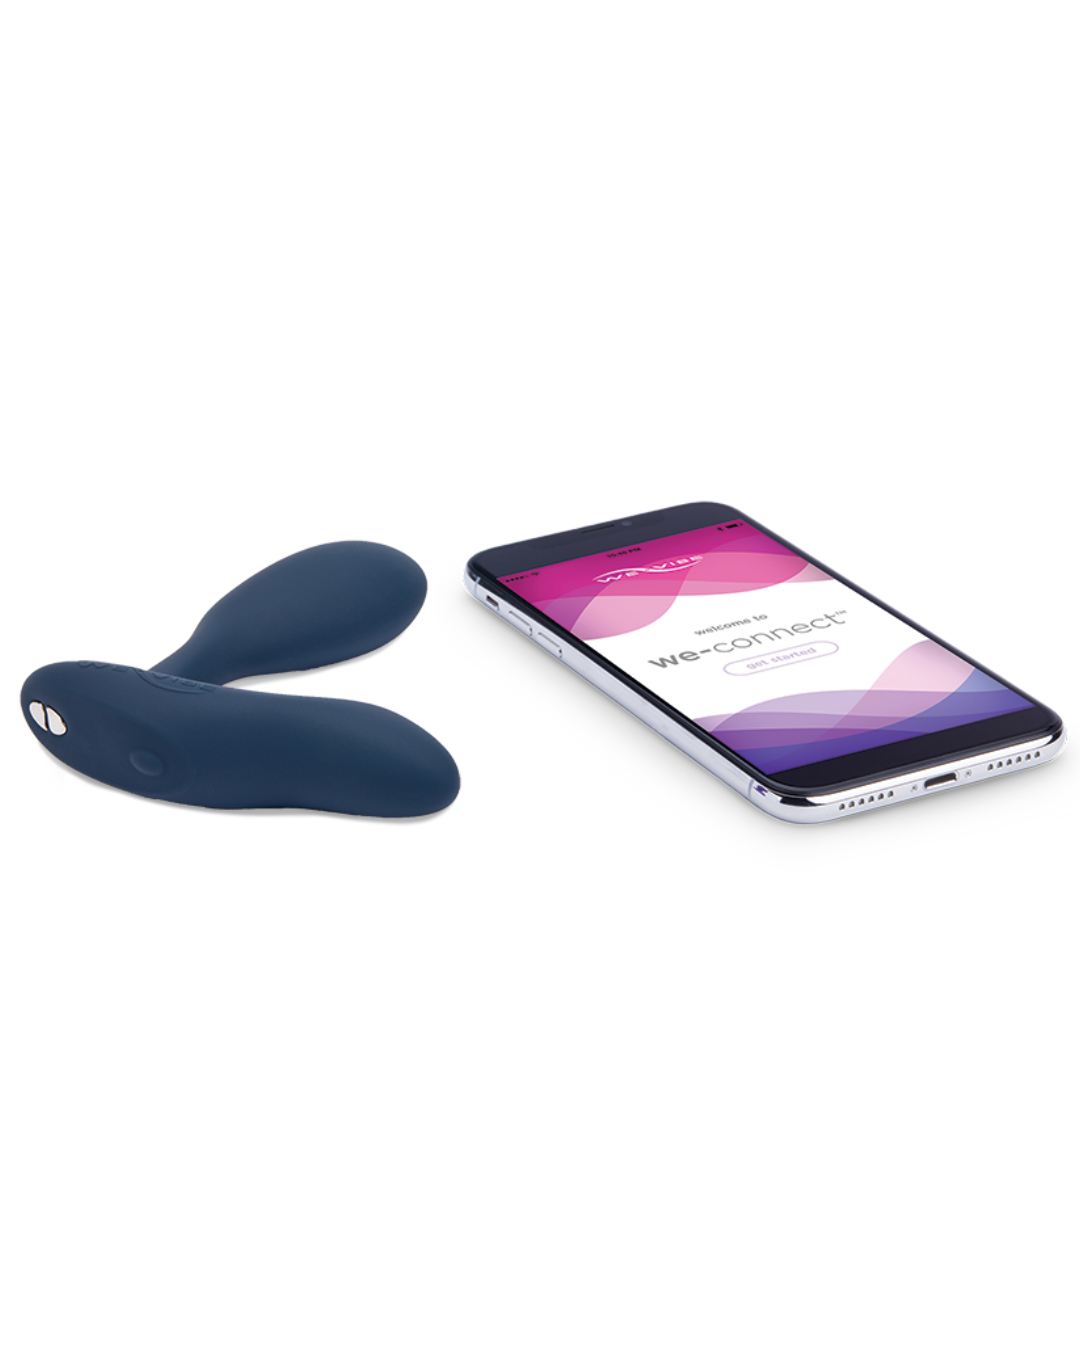 We-Vibe Vector Remote Controlled Adjustable Prostate Massager with smartphone